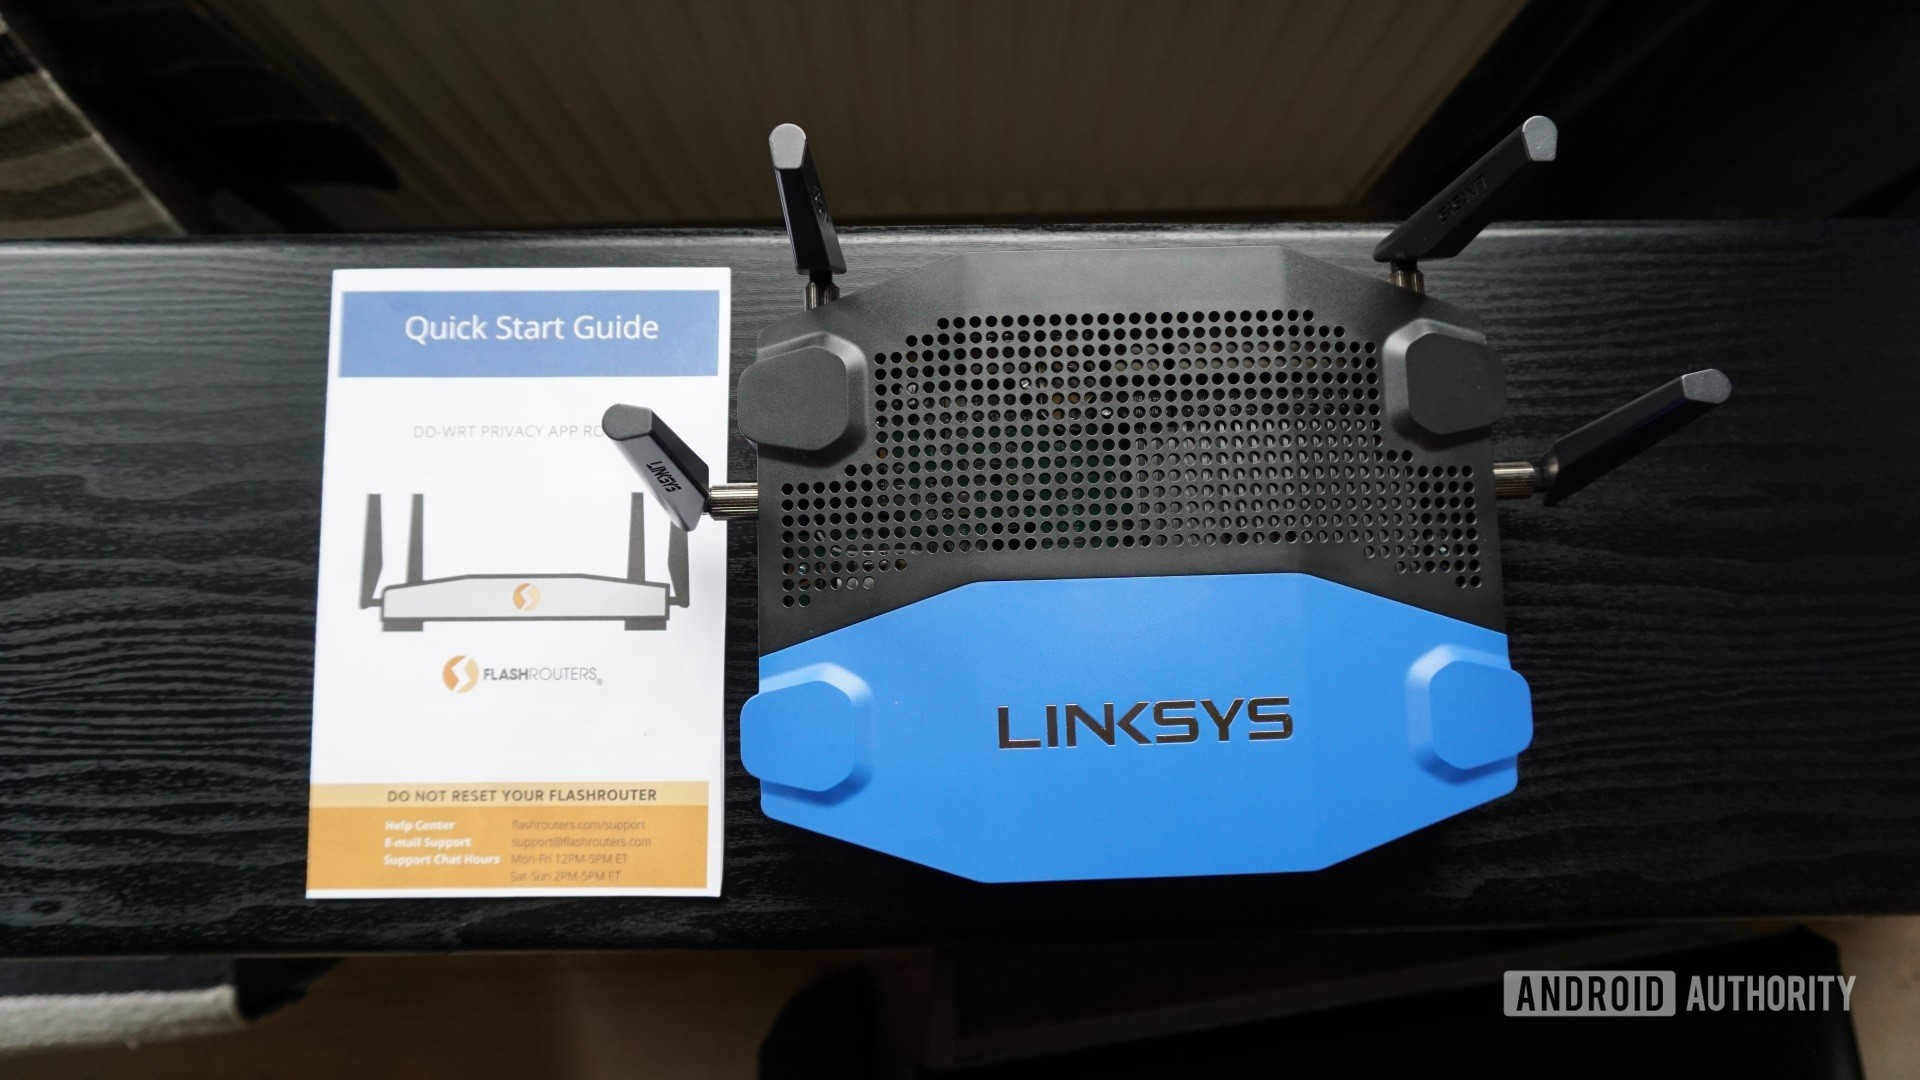 Flashrouters picture of Linksys-3200 with quick start guide